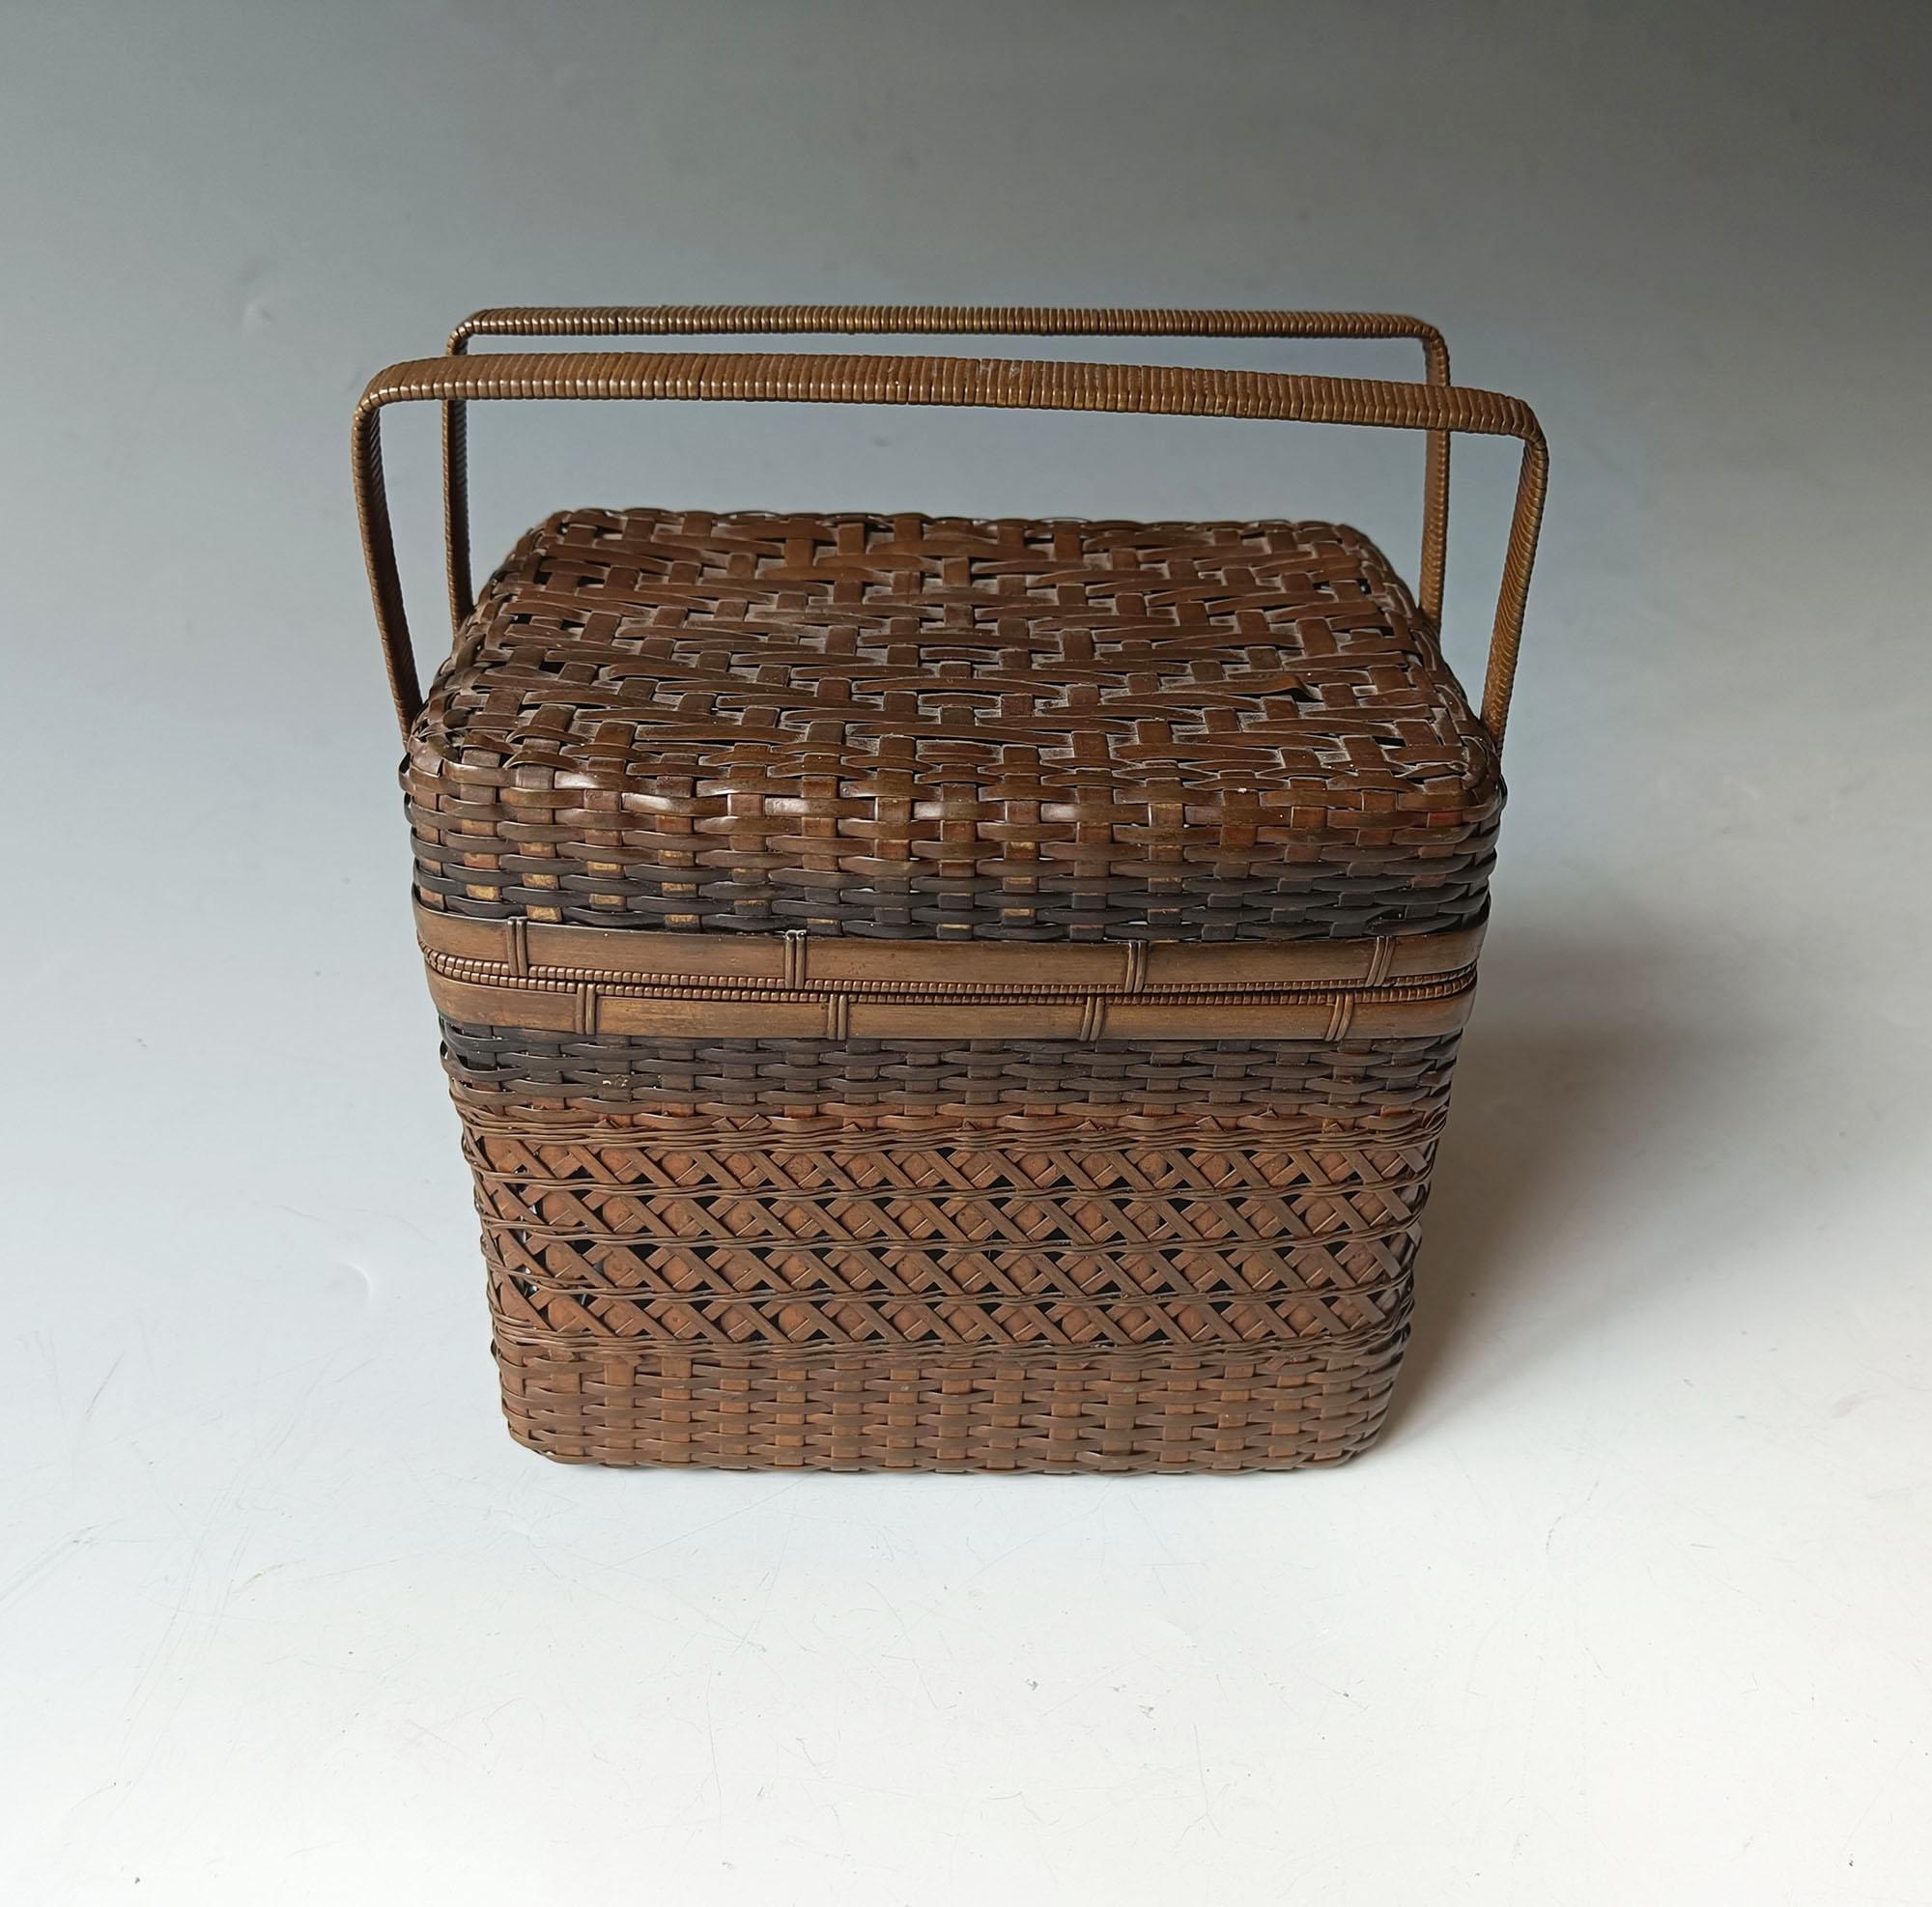 A fine a rare Japanese box masterly woven in copper, the box with lid and handles    
dates to 19th century Meiji Period, and it imitates the Ikebana bamboo basketry style
Height  17 cm ( excluding handles)
Width 15 cm
Depth 12 cm 
Condition: Fine